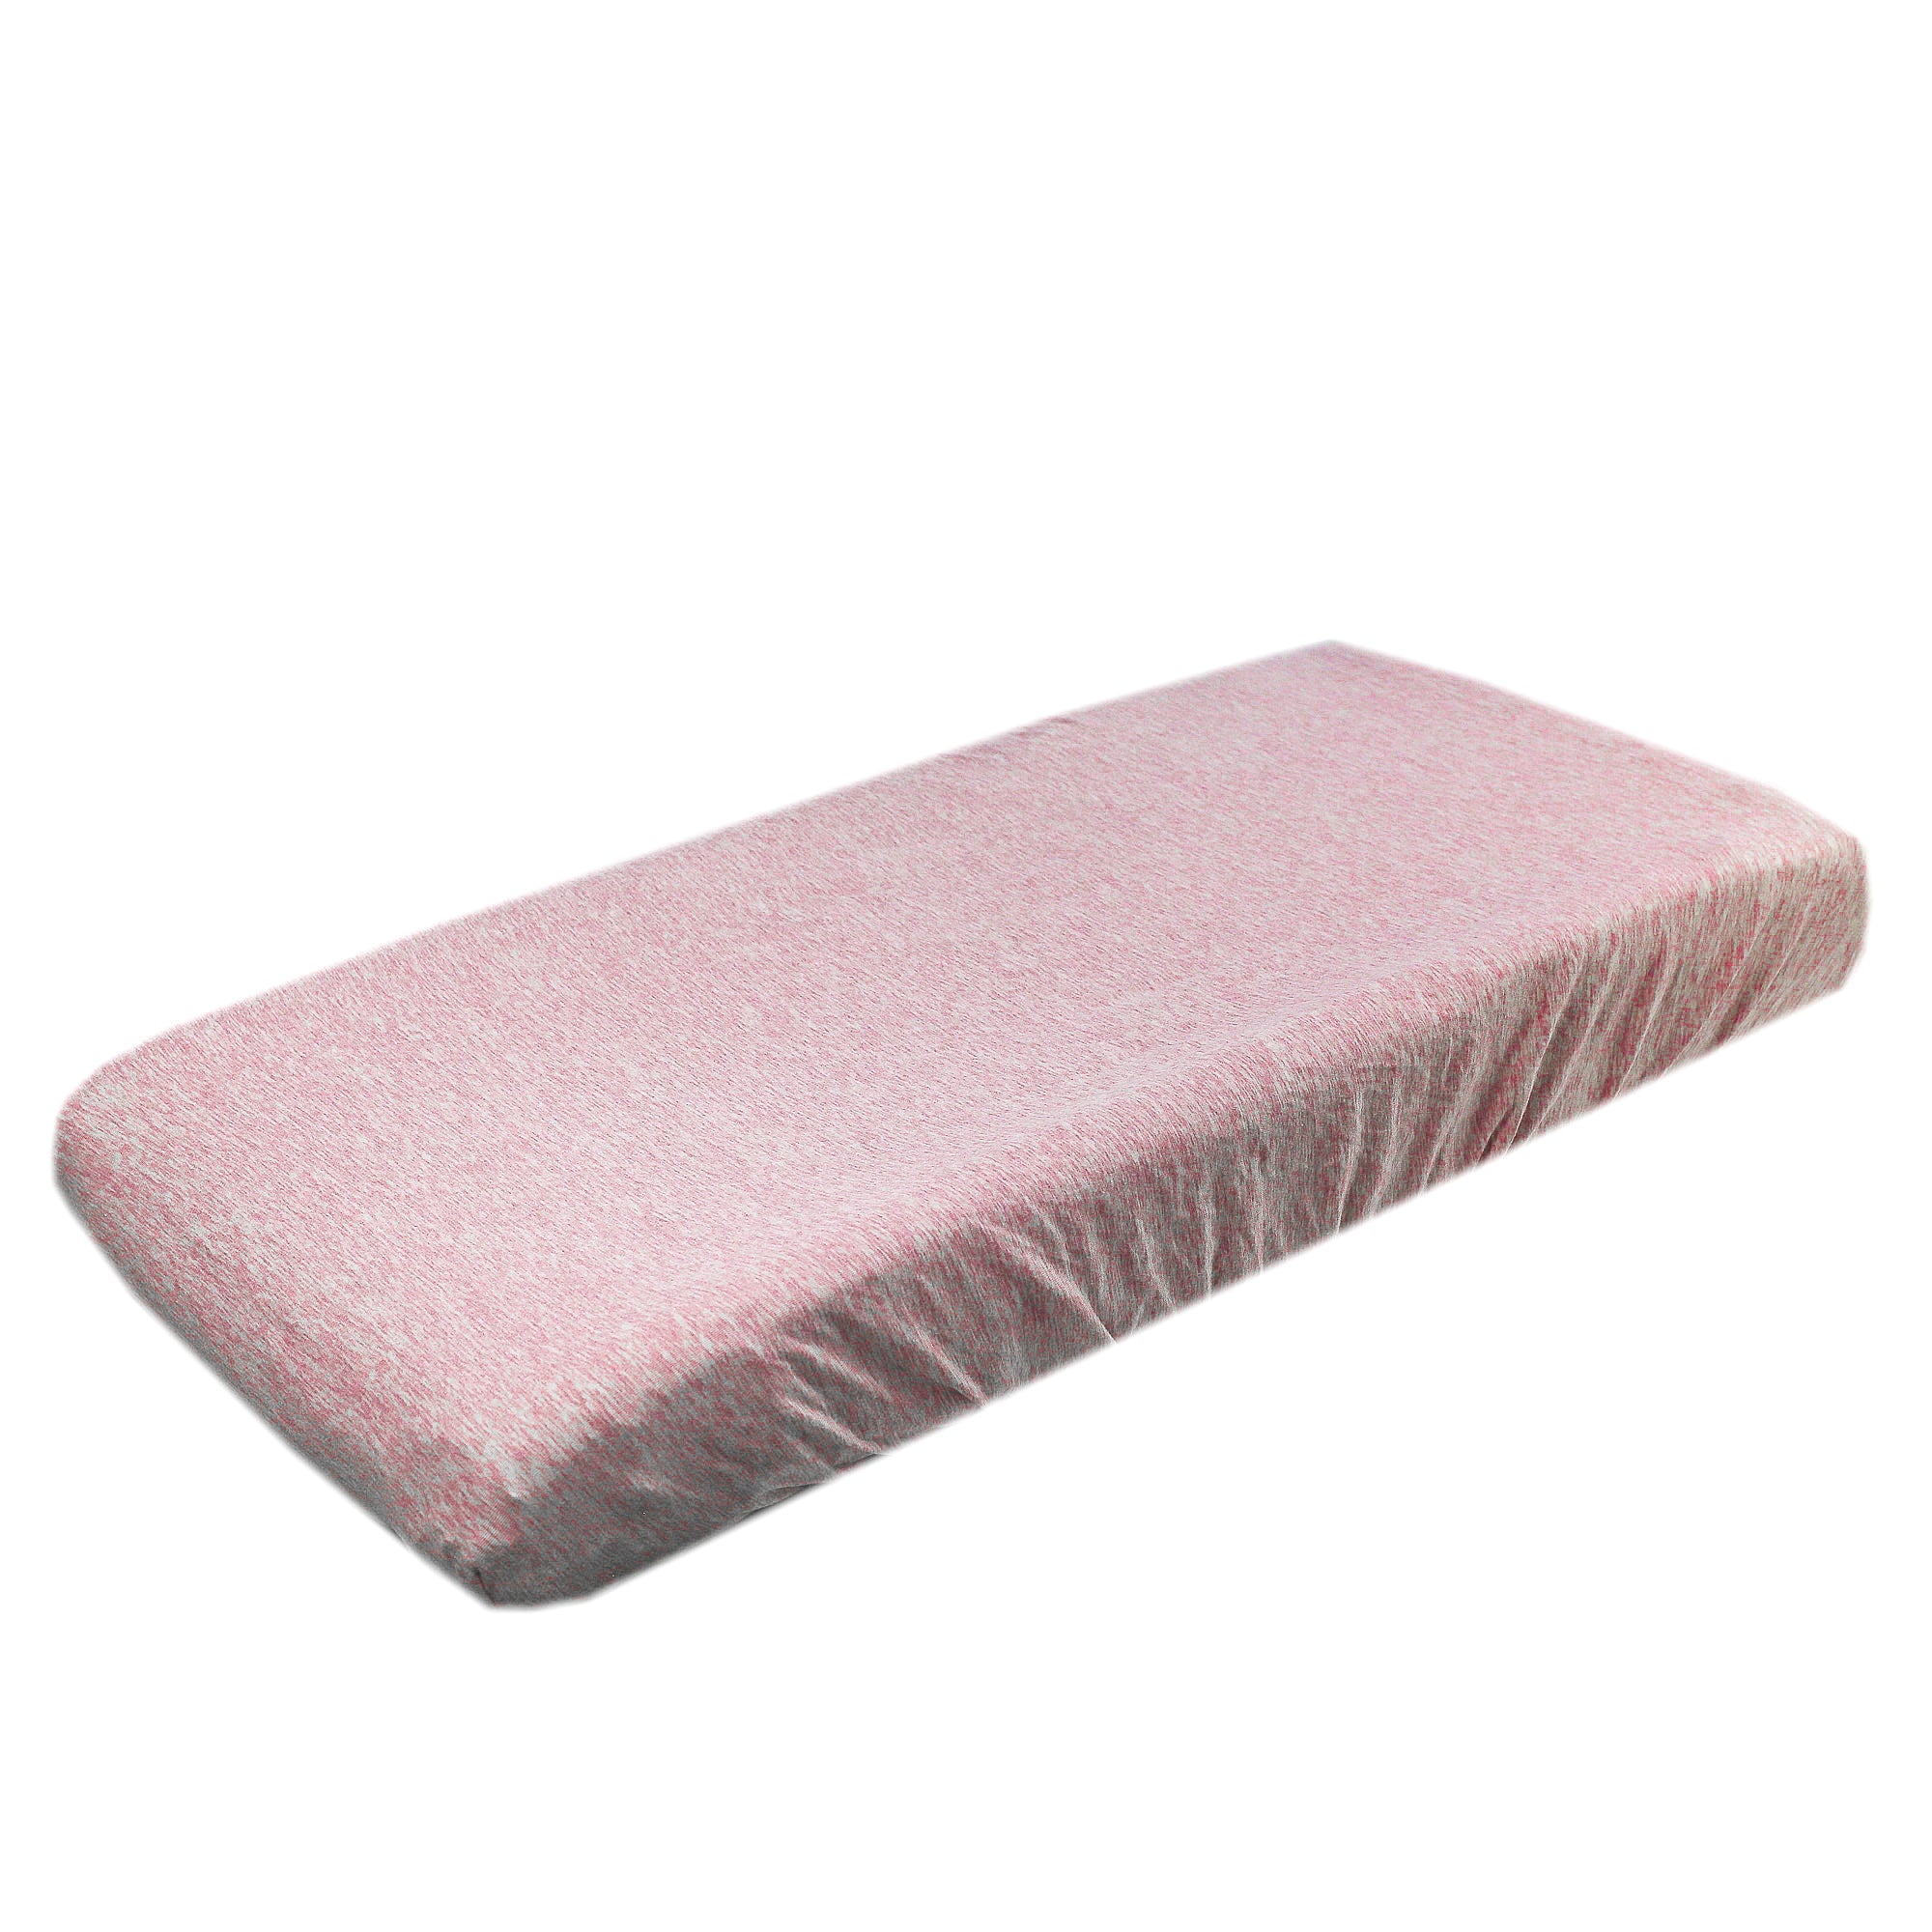 Premium Knit Diaper Changing Pad Cover - Maeve